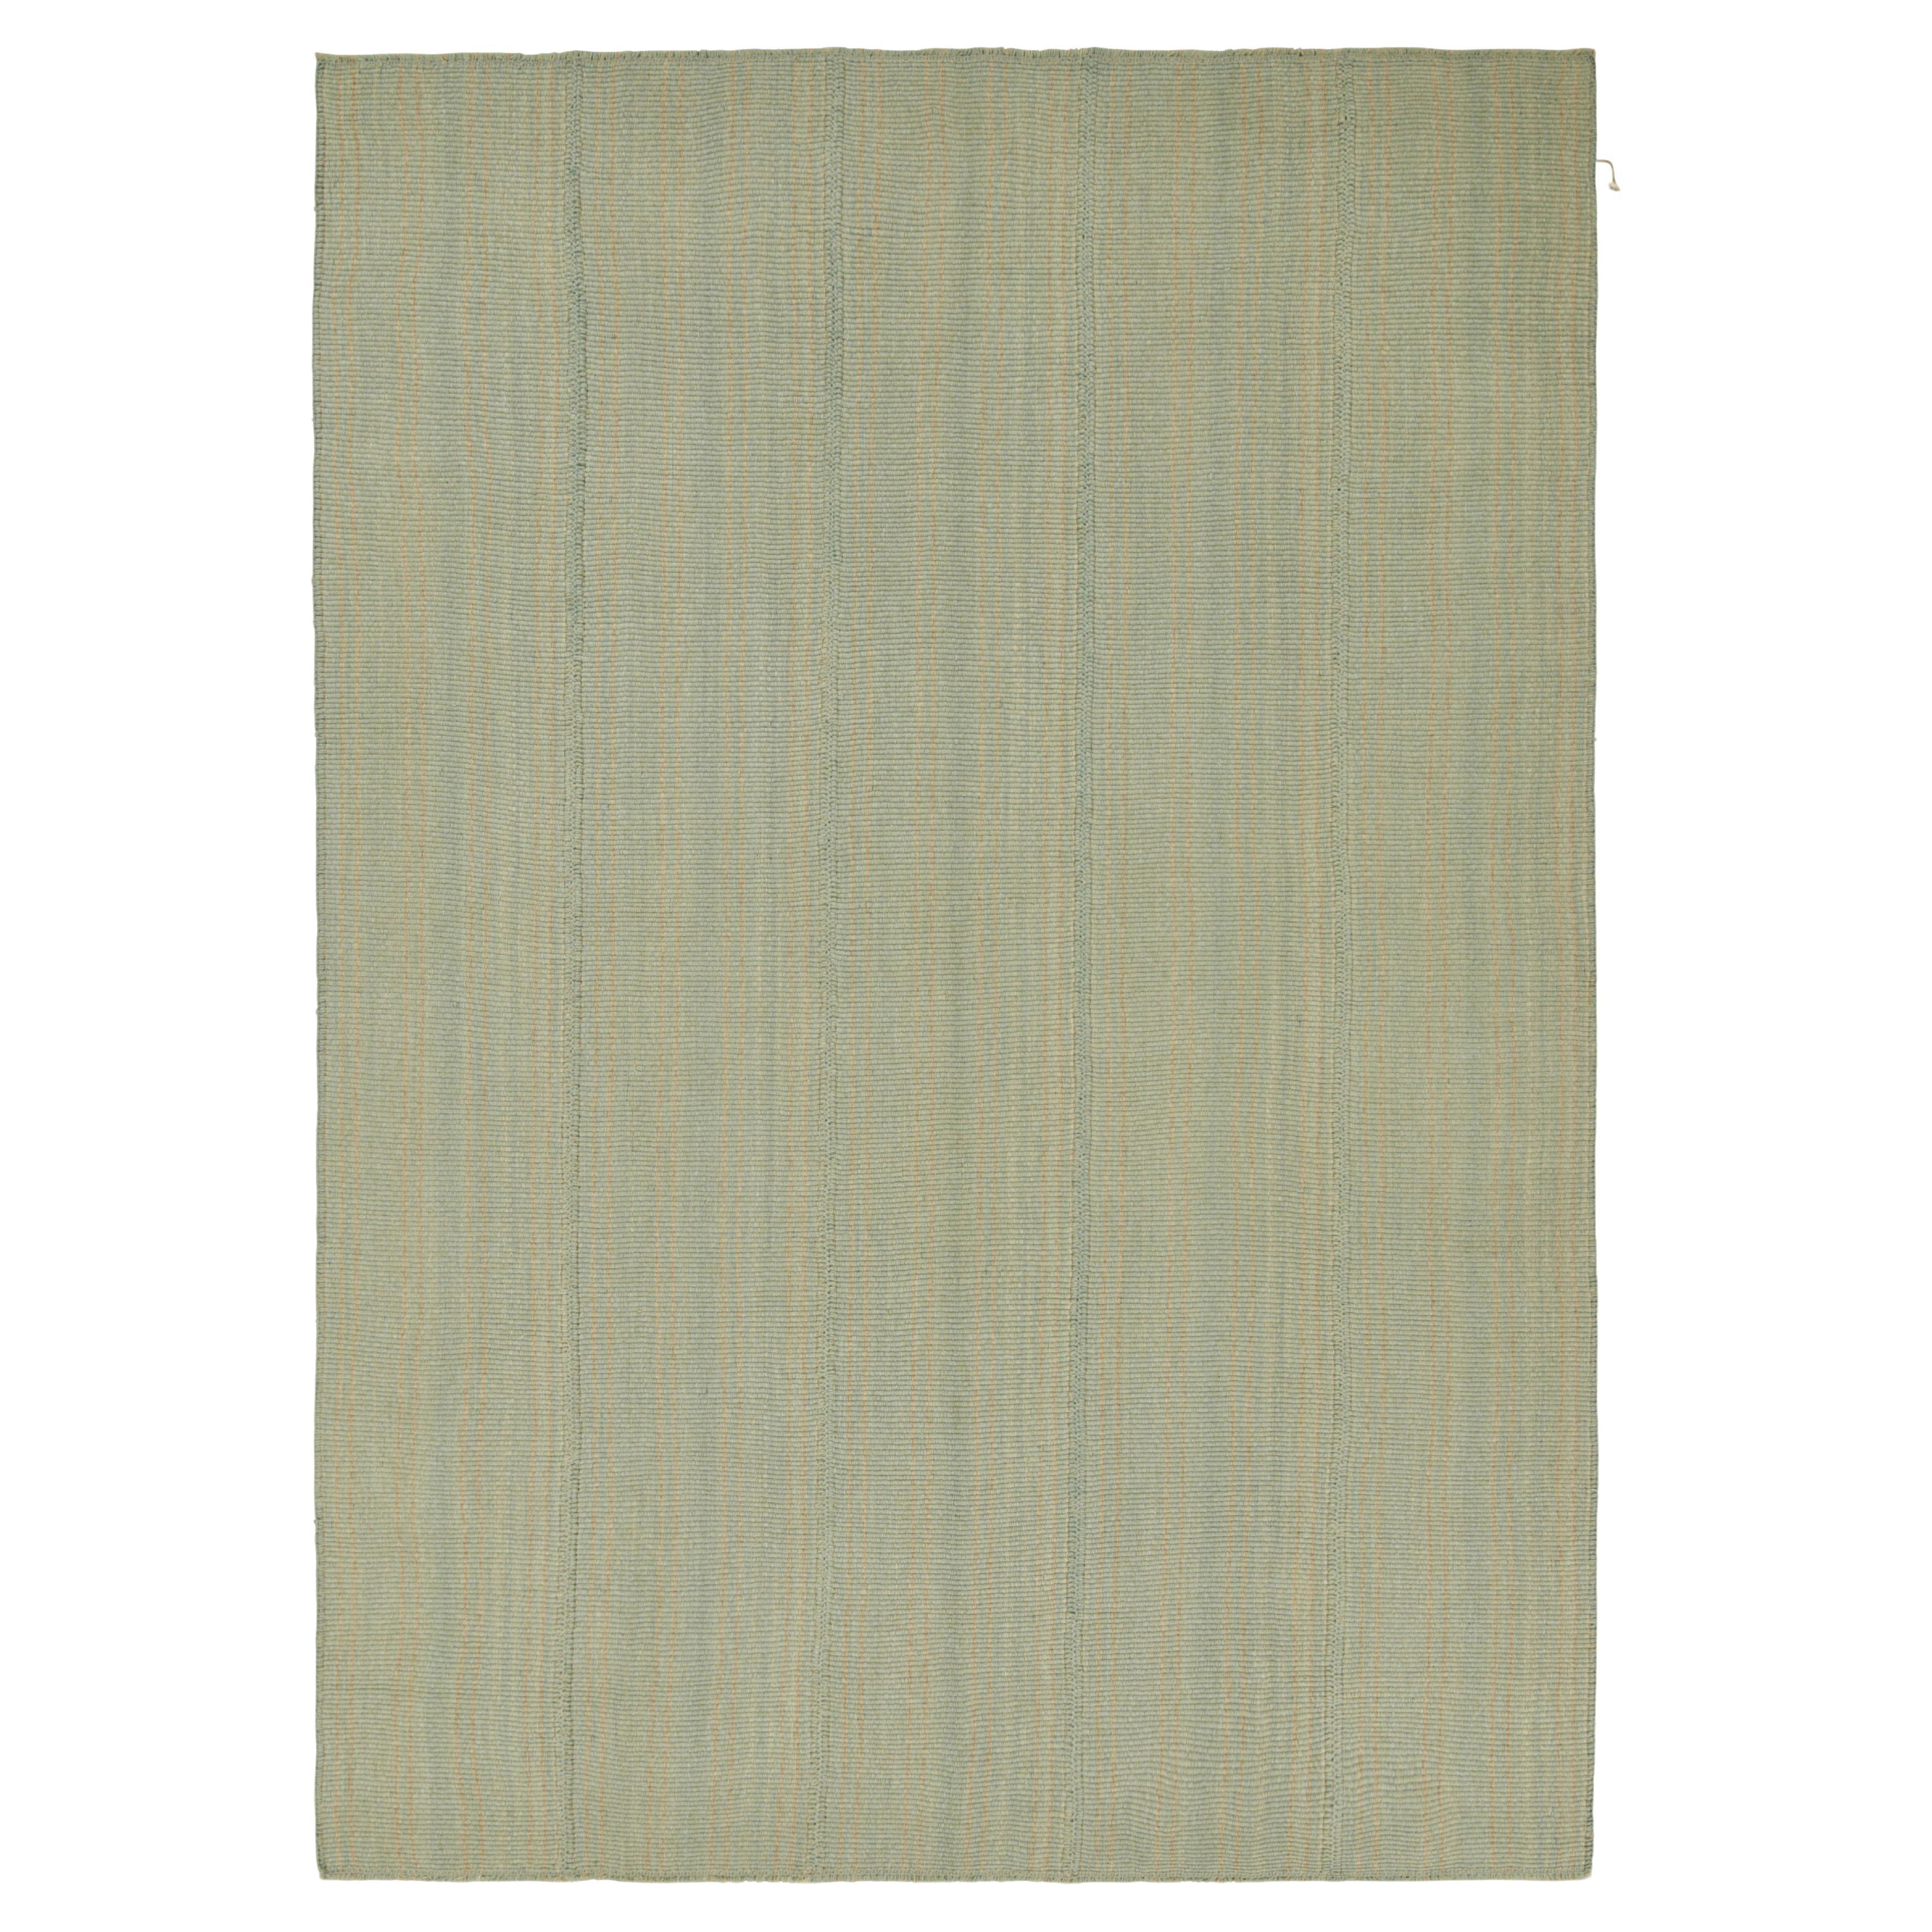 Rug & Kilim’s Contemporary Kilim in Blue and Beige Textural Stripes For Sale